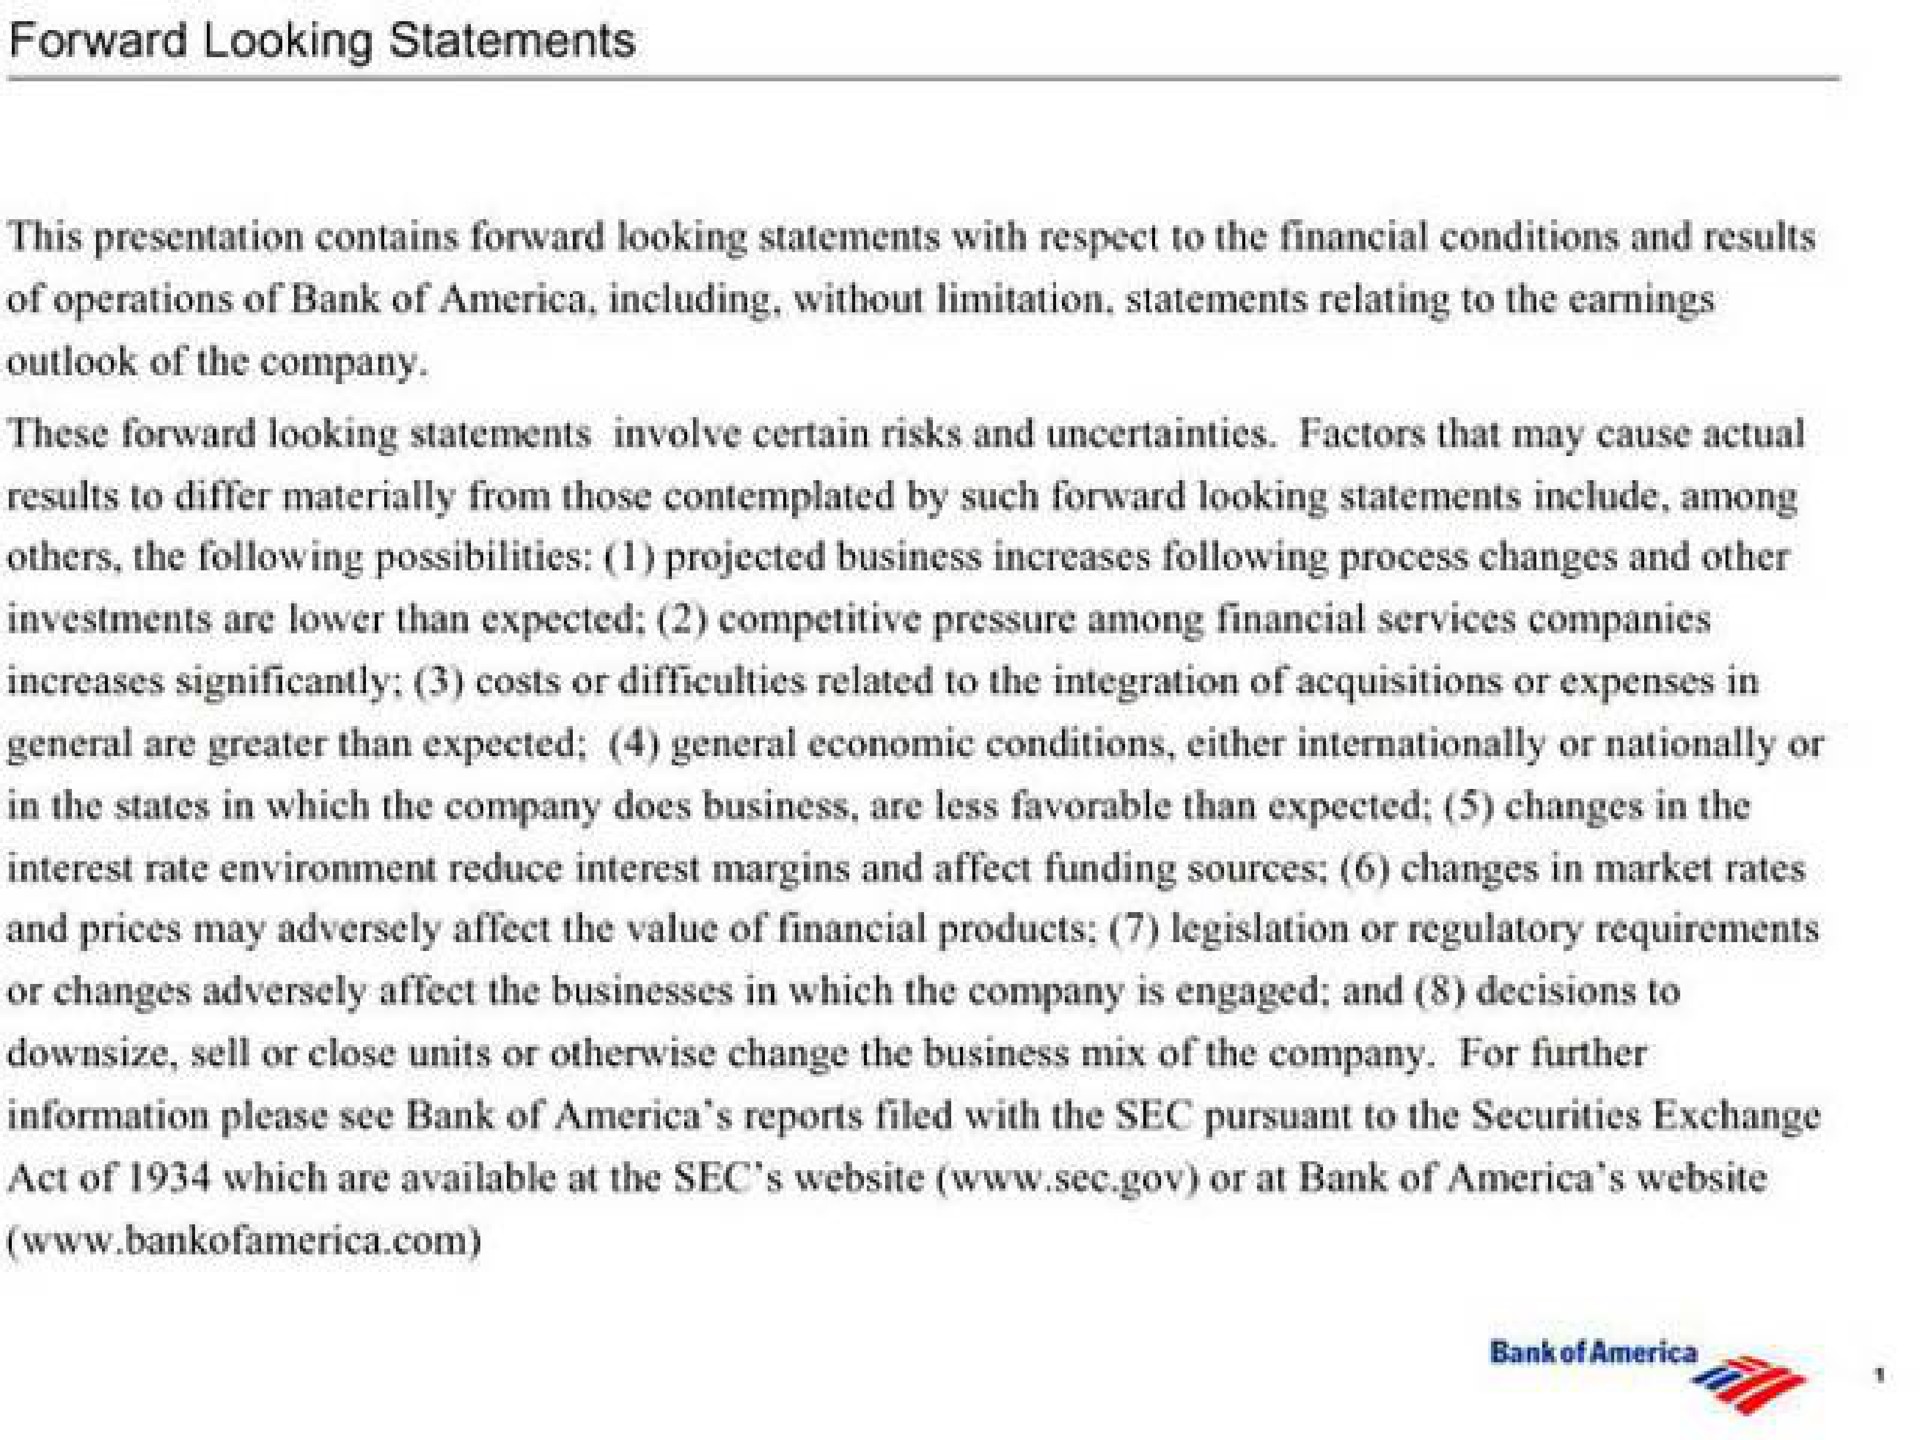 forward looking statements | Bank of America